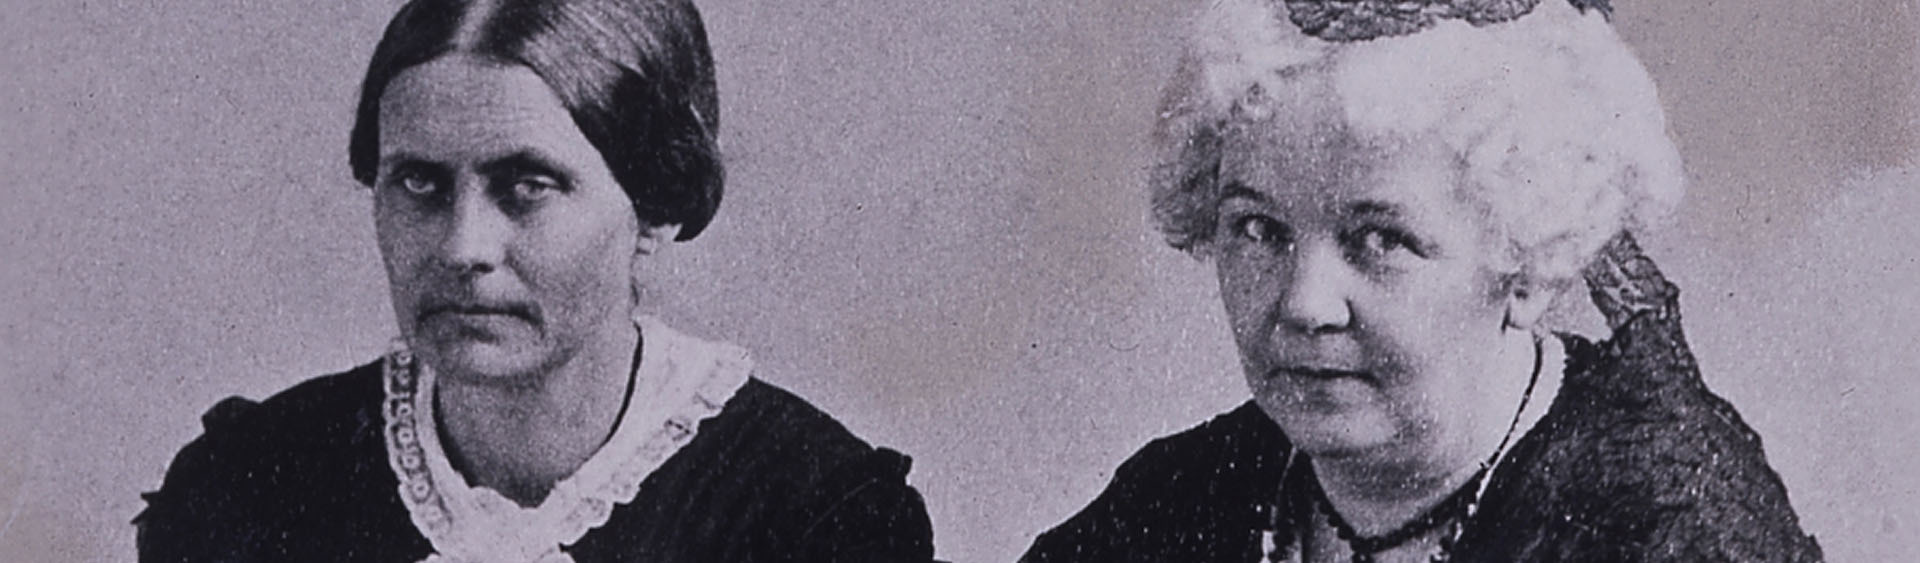 A lilac-hued photo of Elizabeth Cady Stanton sitting alongside Susan B. Anthony. They both have serious expressions on their faces.